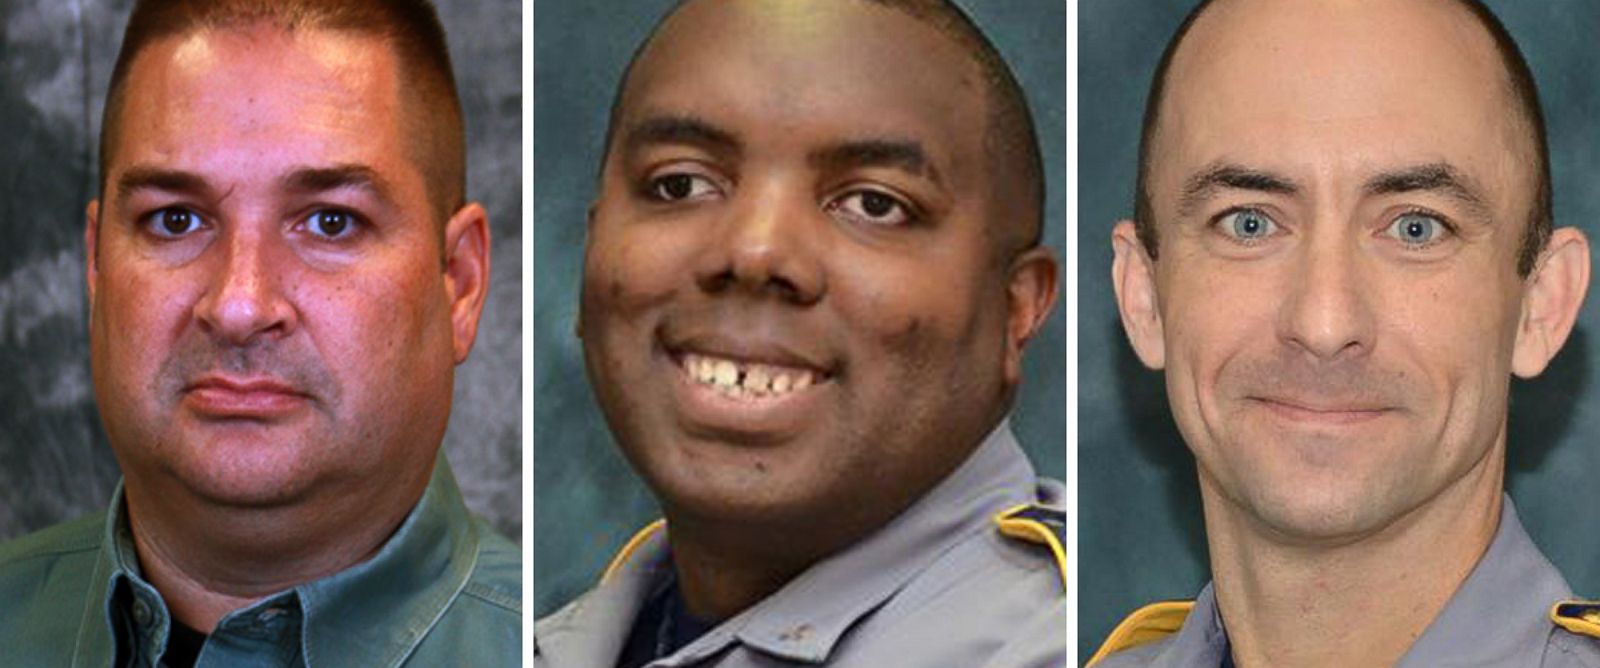 Officers killed in Baton Rouge shooting identified